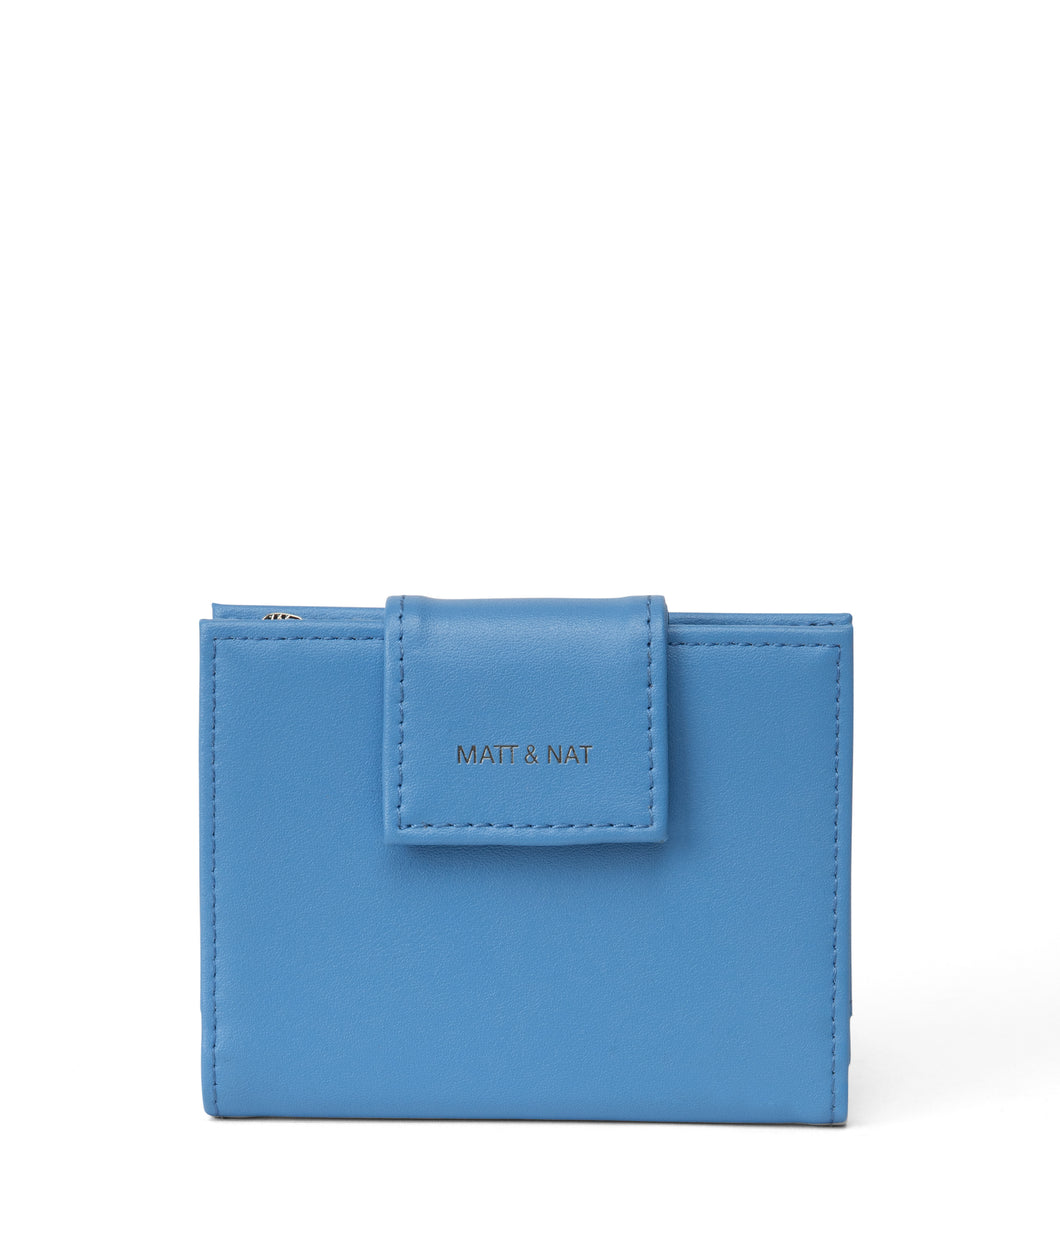 CRUISE Small Wallet in Resort